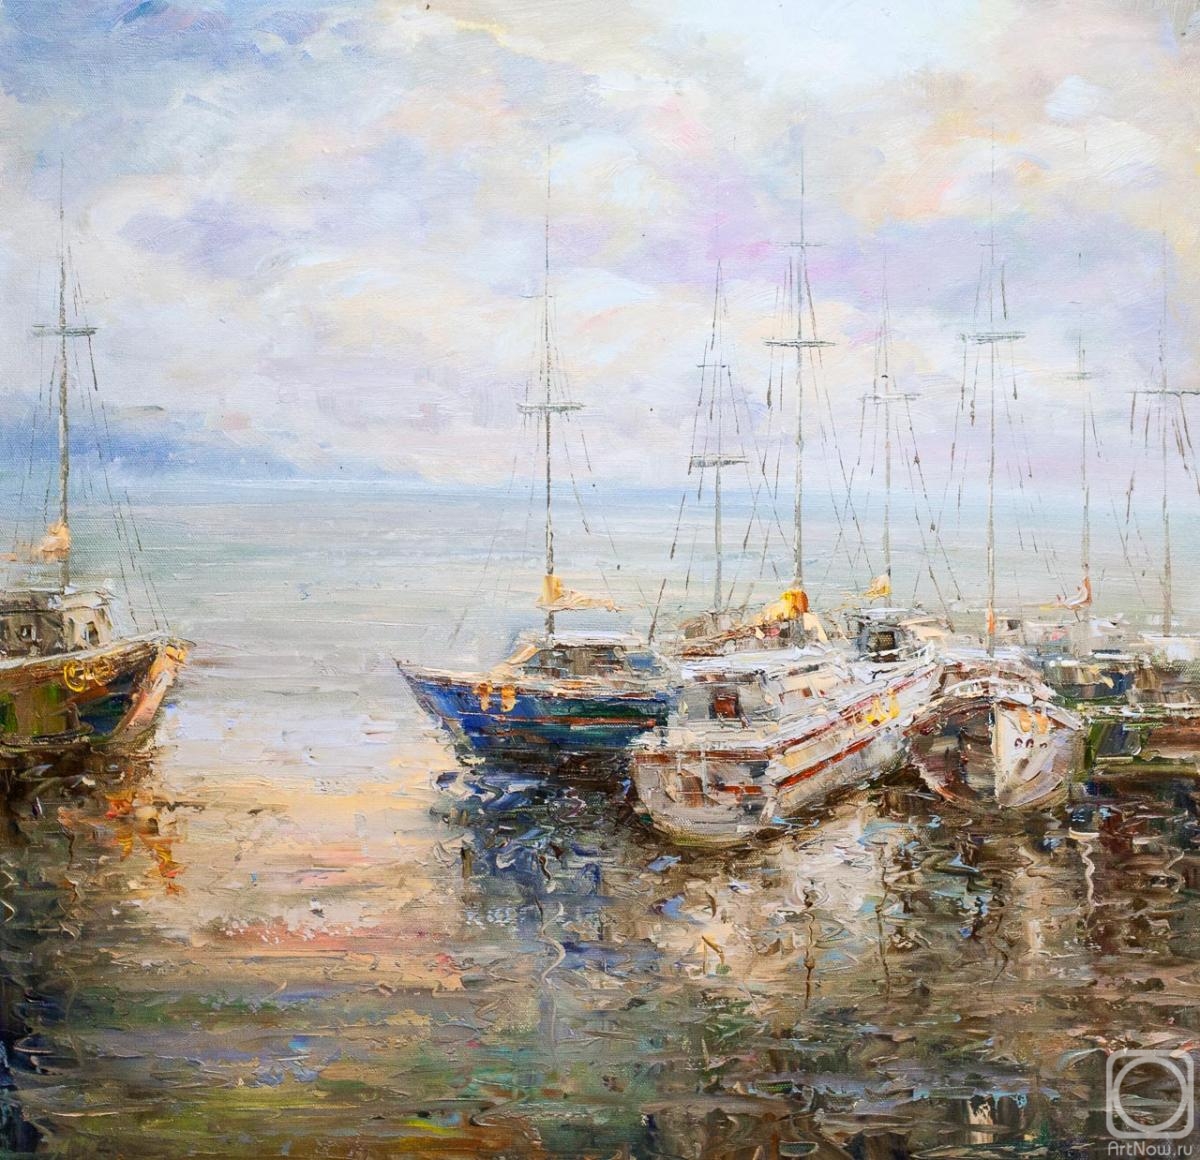 Vevers Christina. Boats in the morning Bay